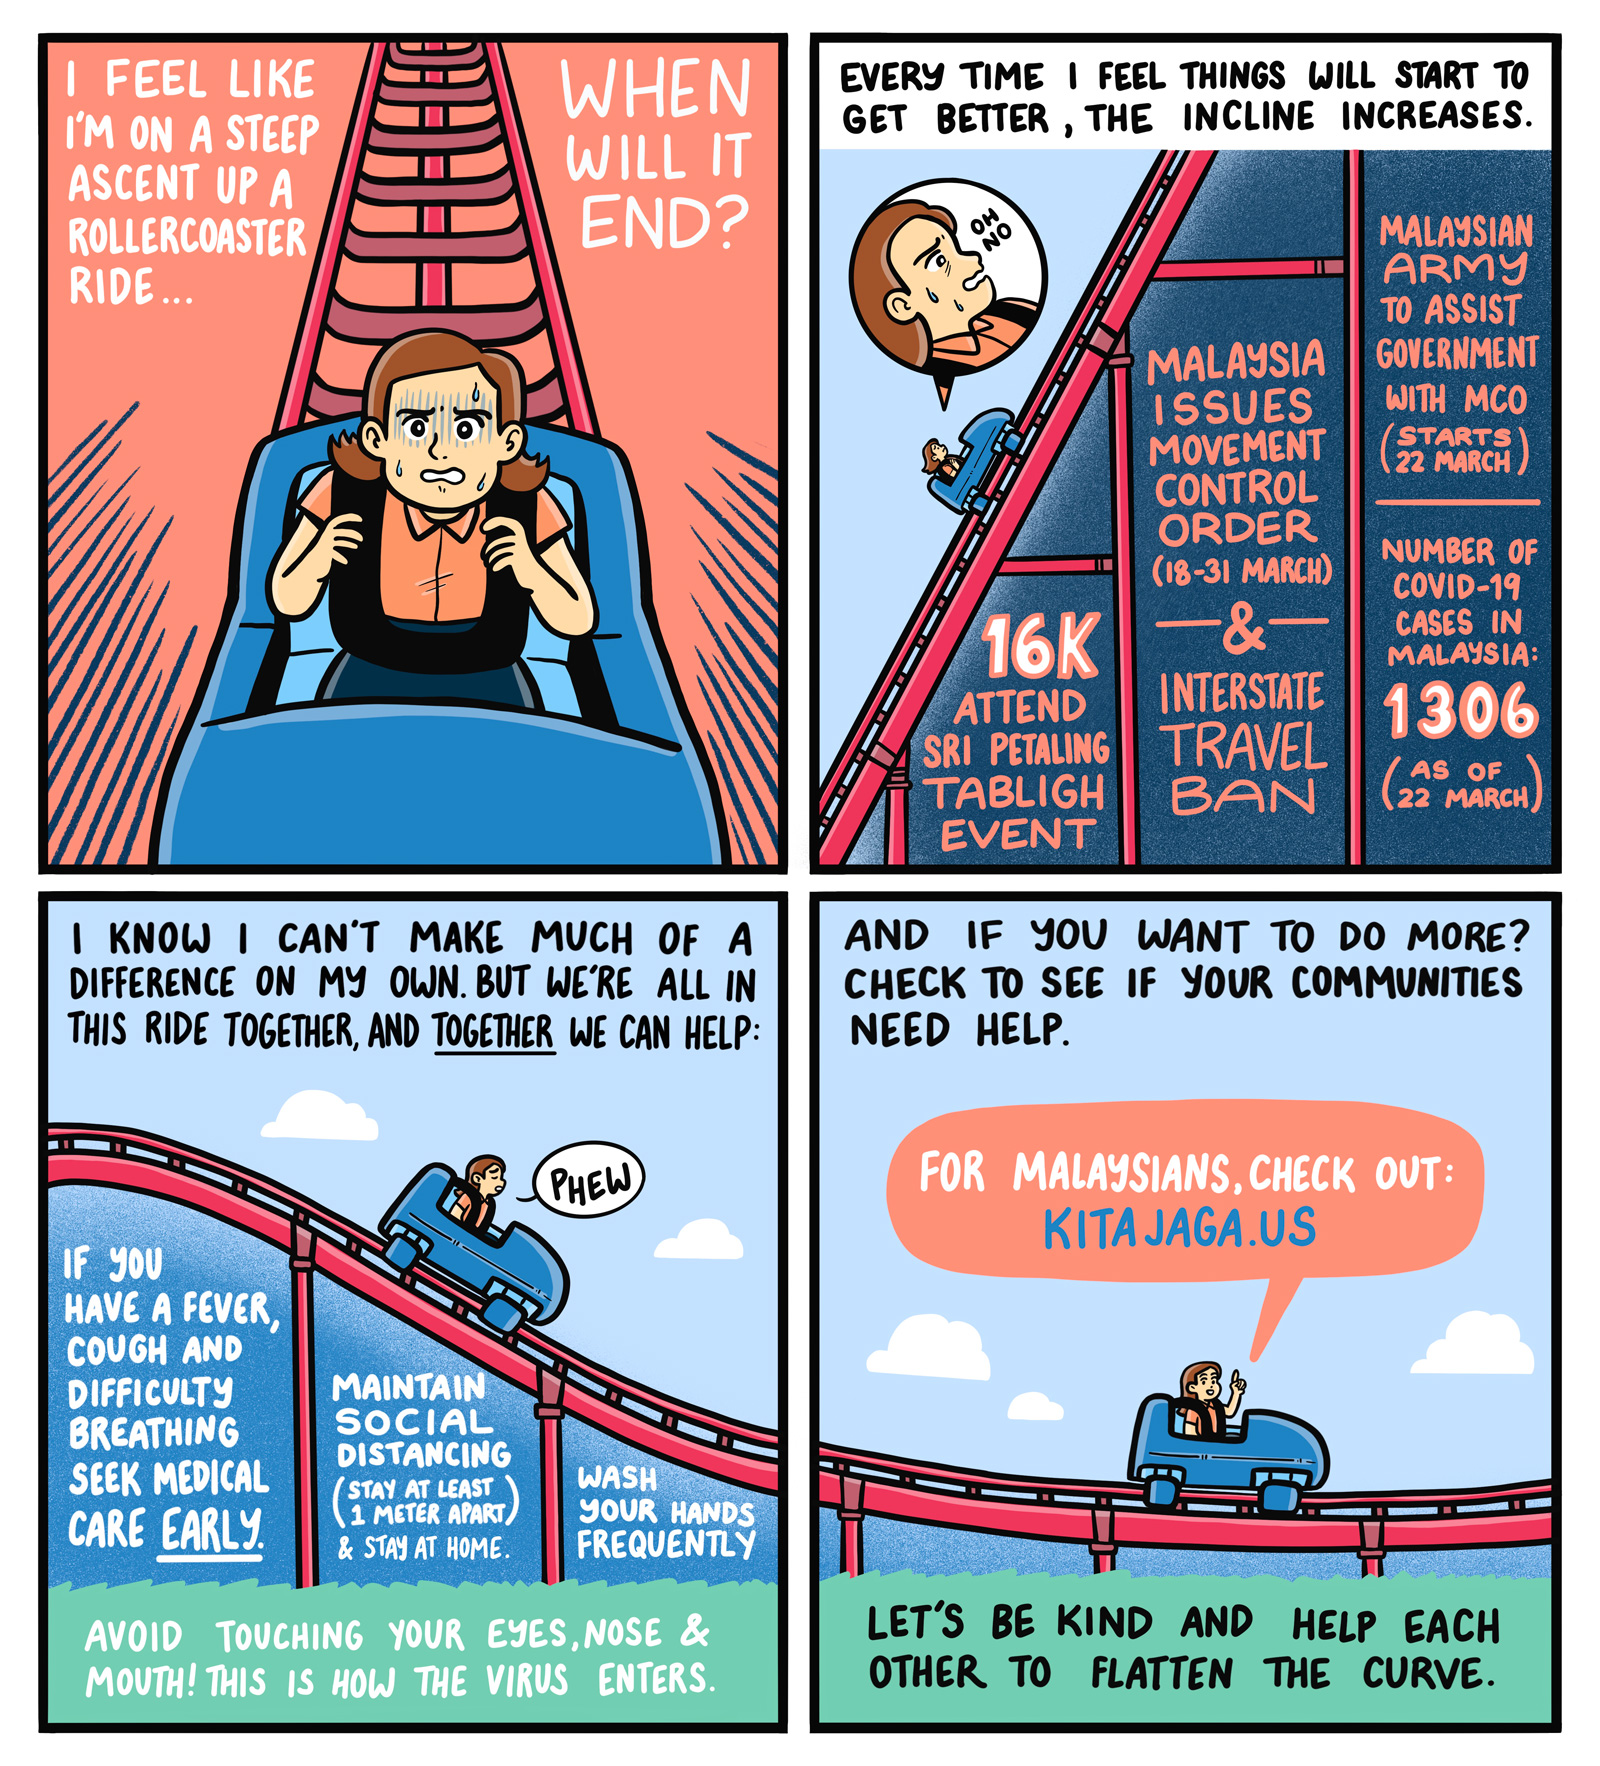 A comic about how society can help to flatten the curve of COVID-19 cases.